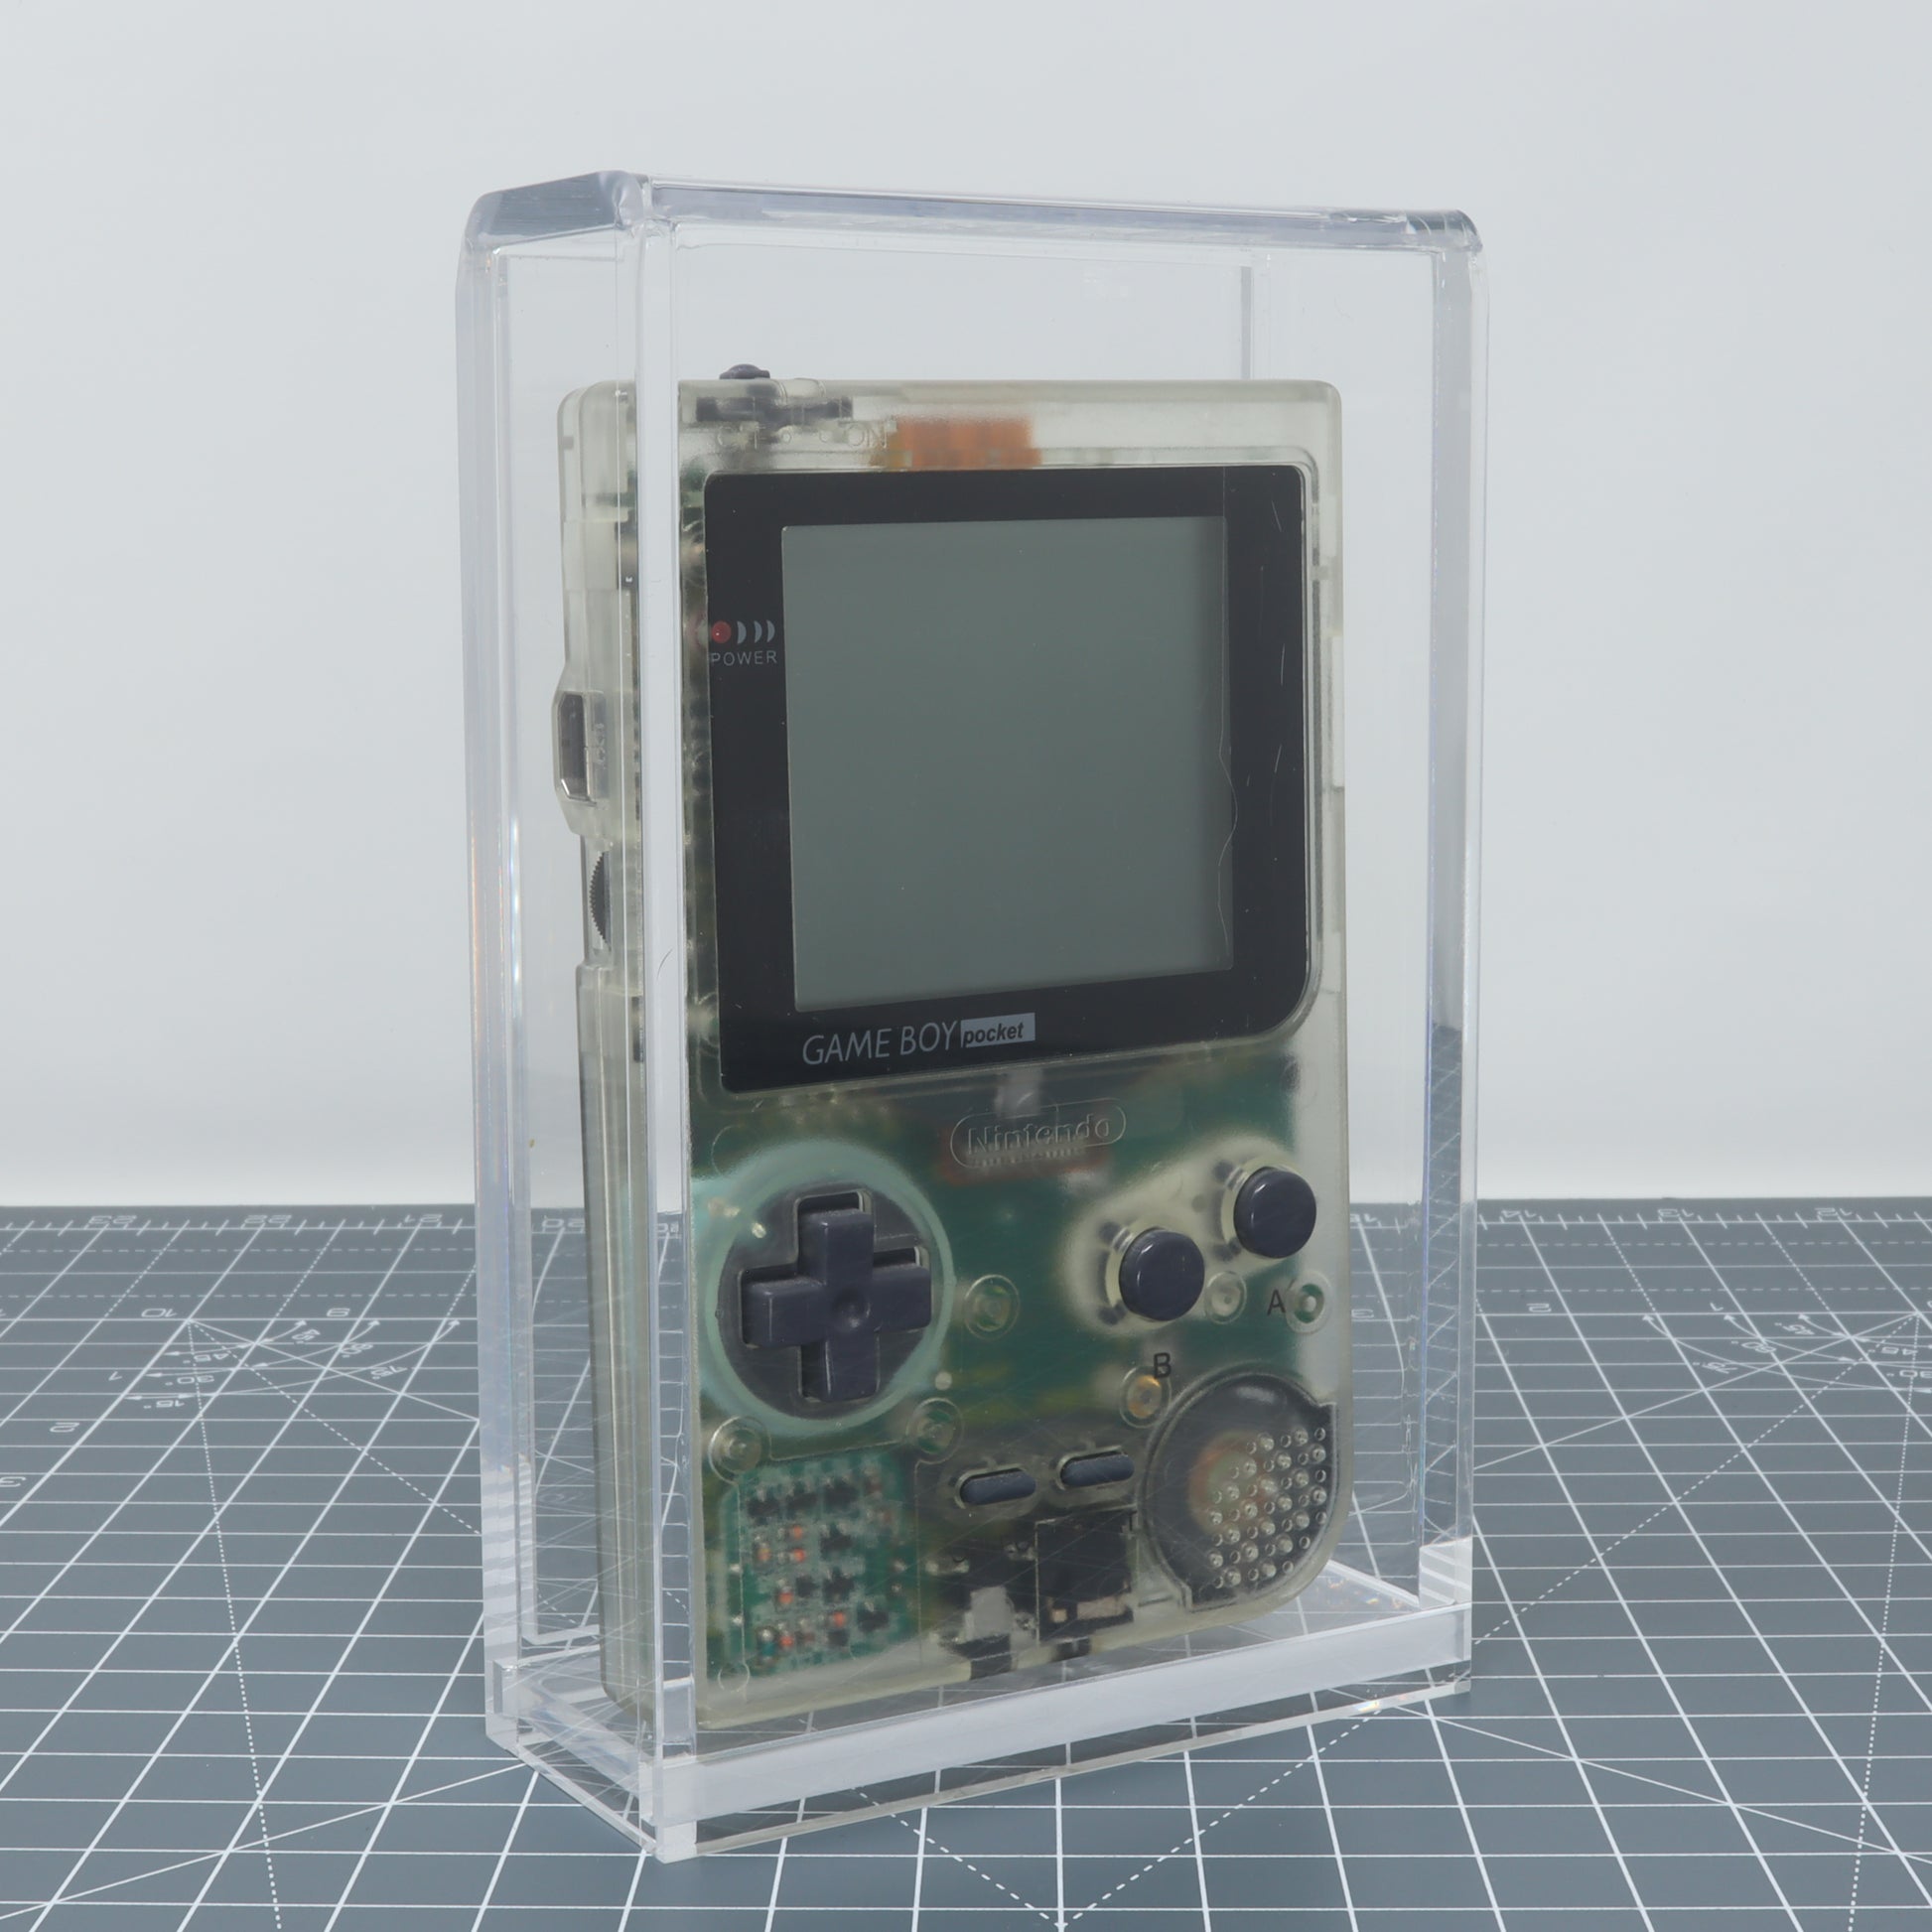 Transparent Game Boy Pocket encased in a clear acrylic display capsule for console protection.